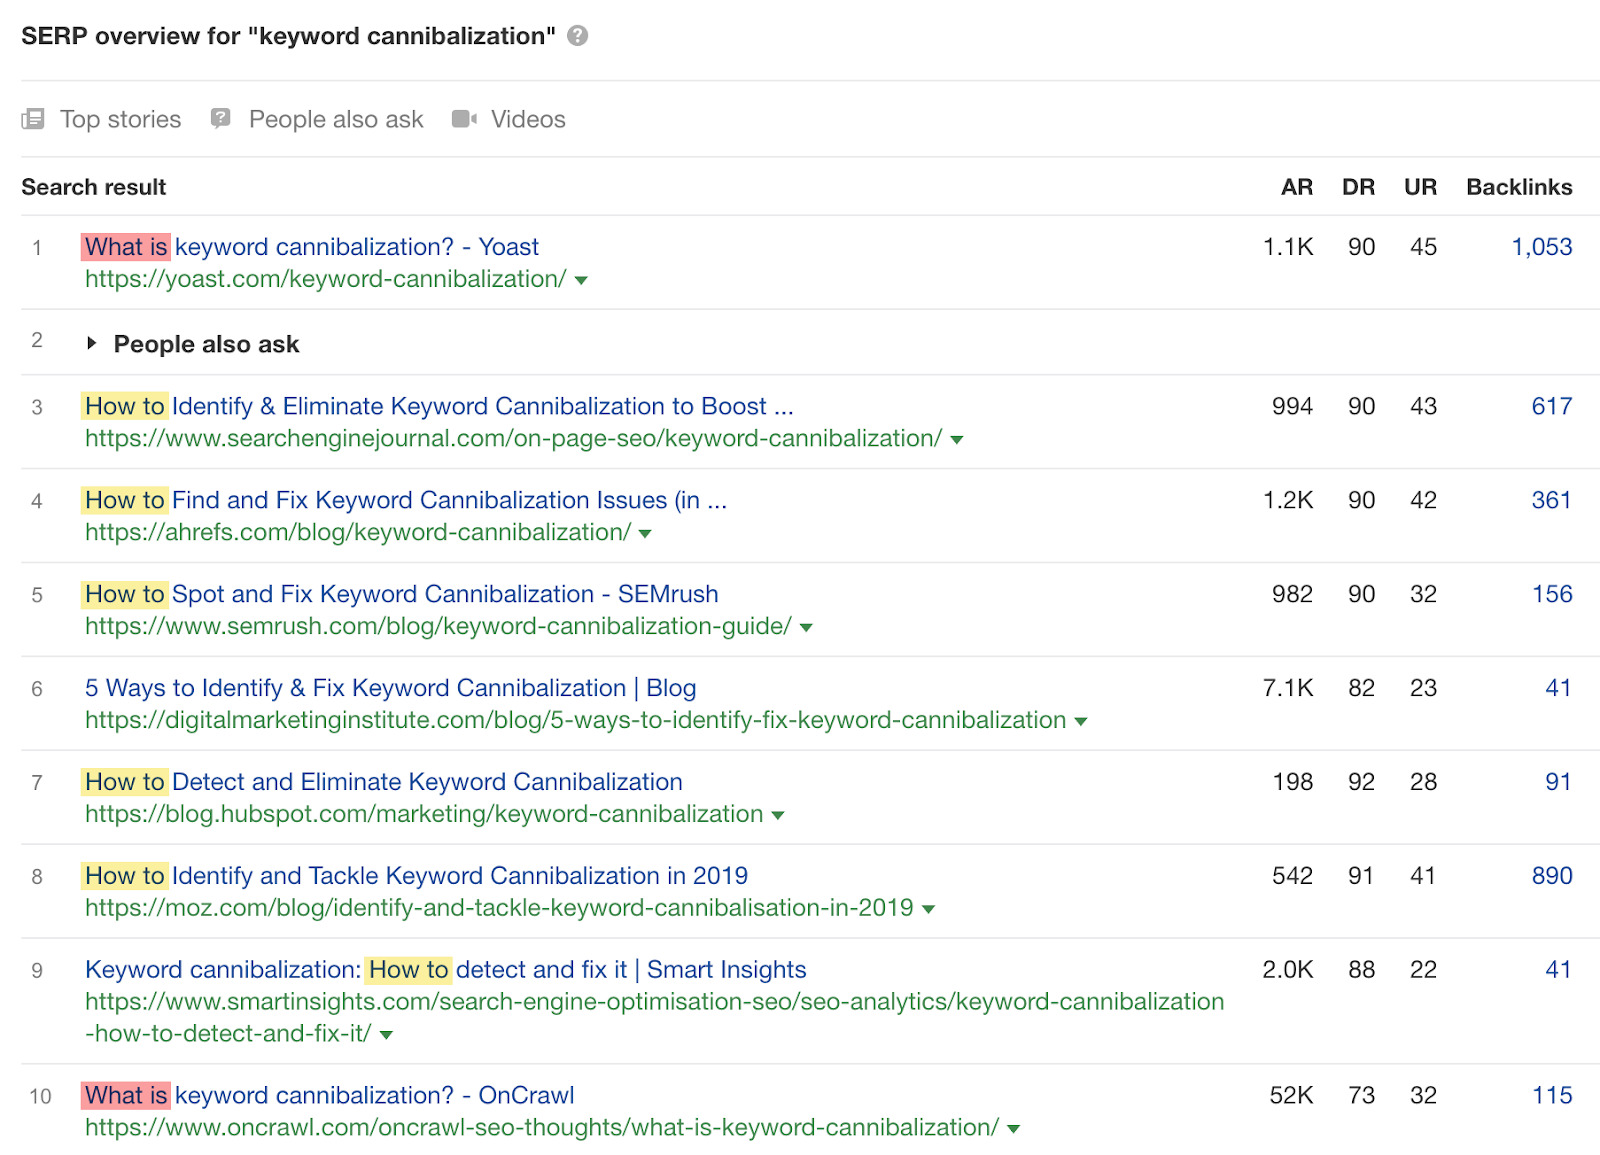 SERP overview for "keyword cannibalization"